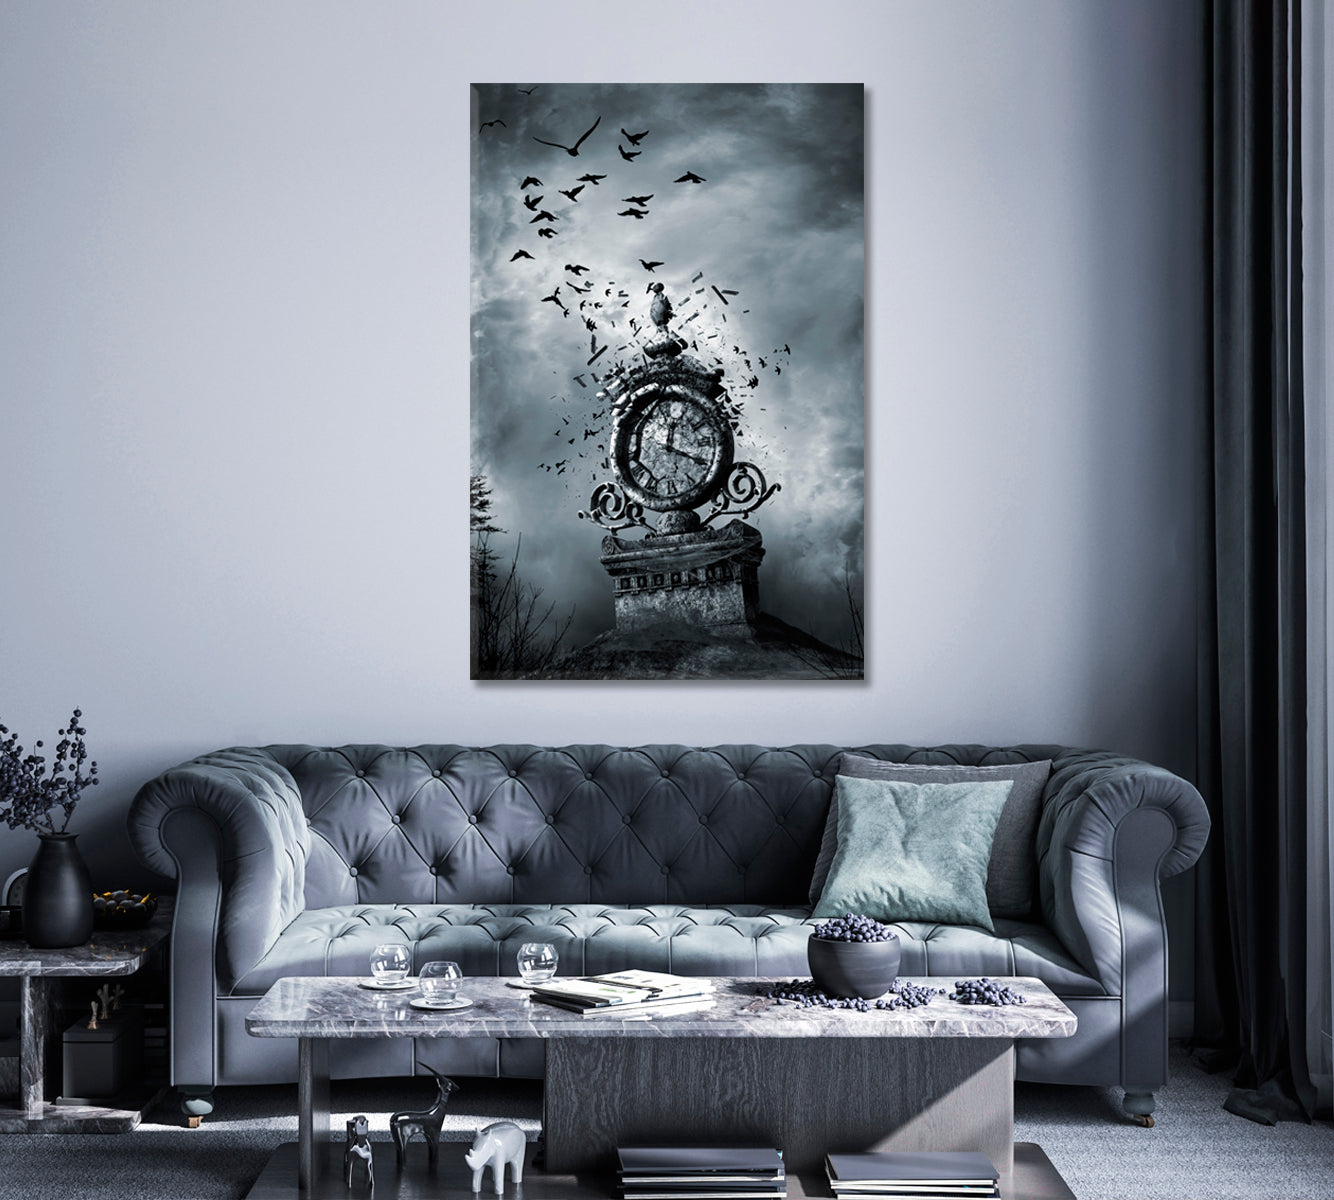 Surrealistic Old Clock. Time is Running Out Canvas Print ArtLexy 1 Panel 16"x24" inches 